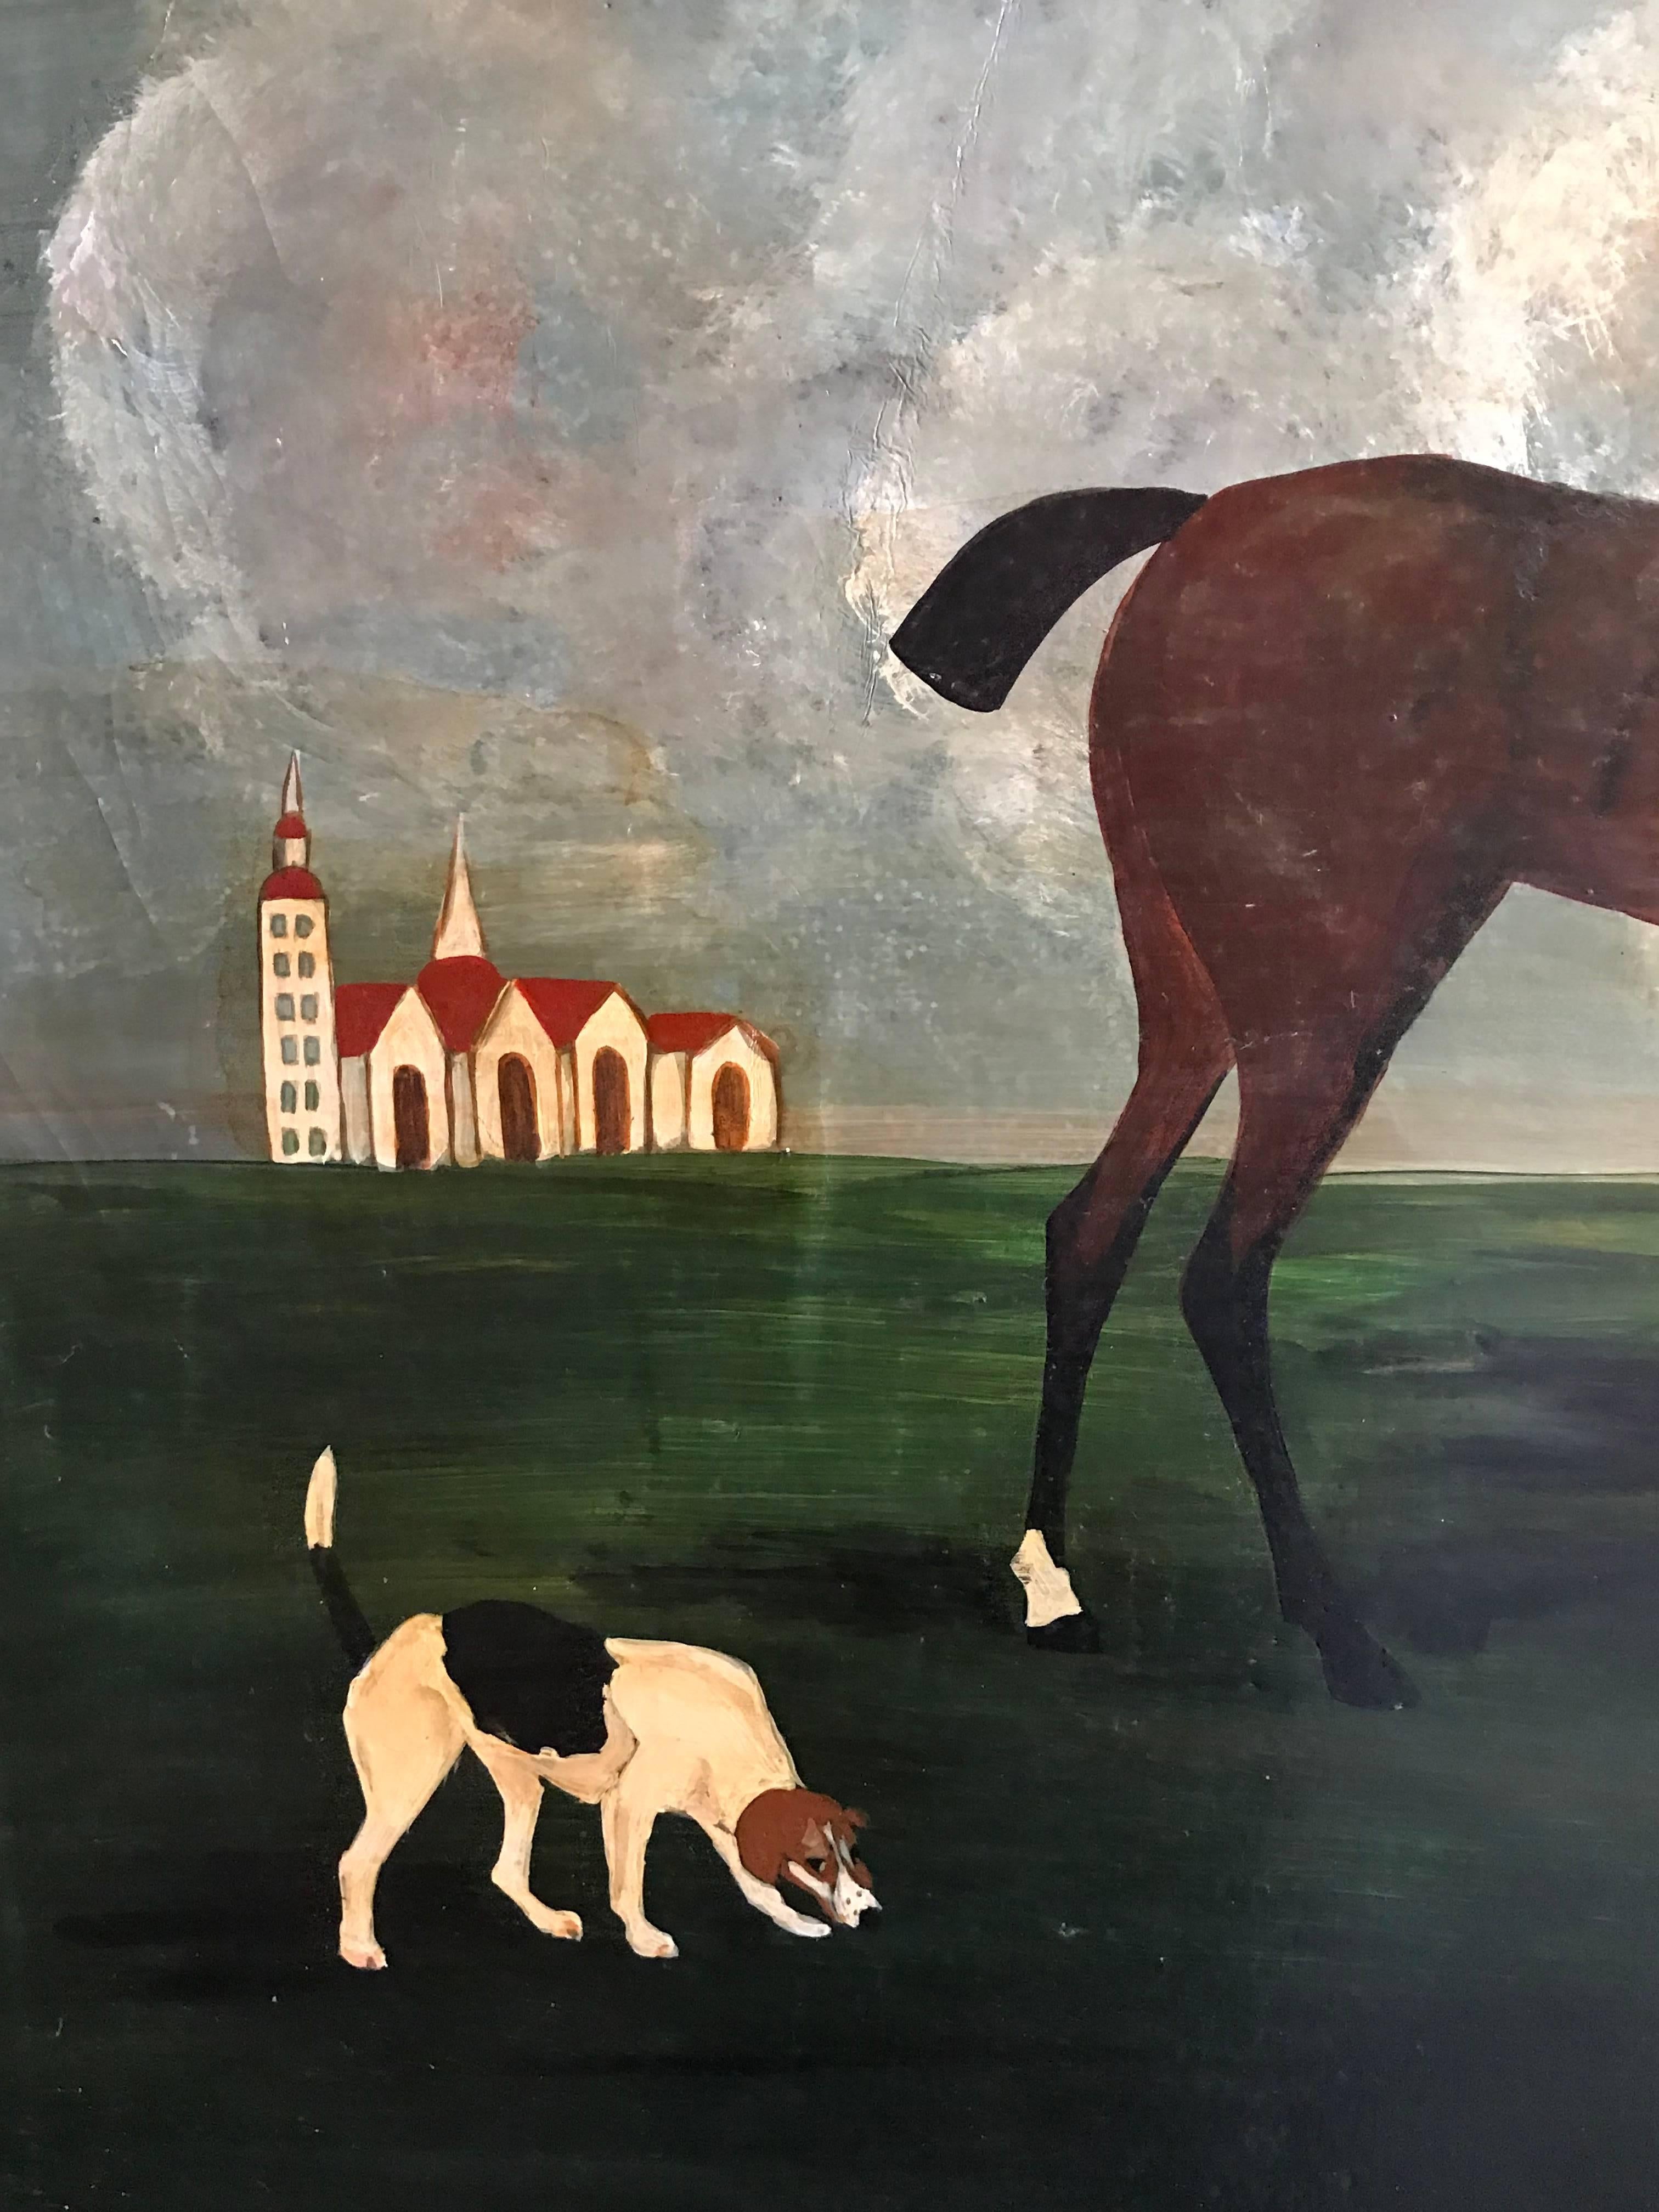 stubbs painting eclipse with a groom